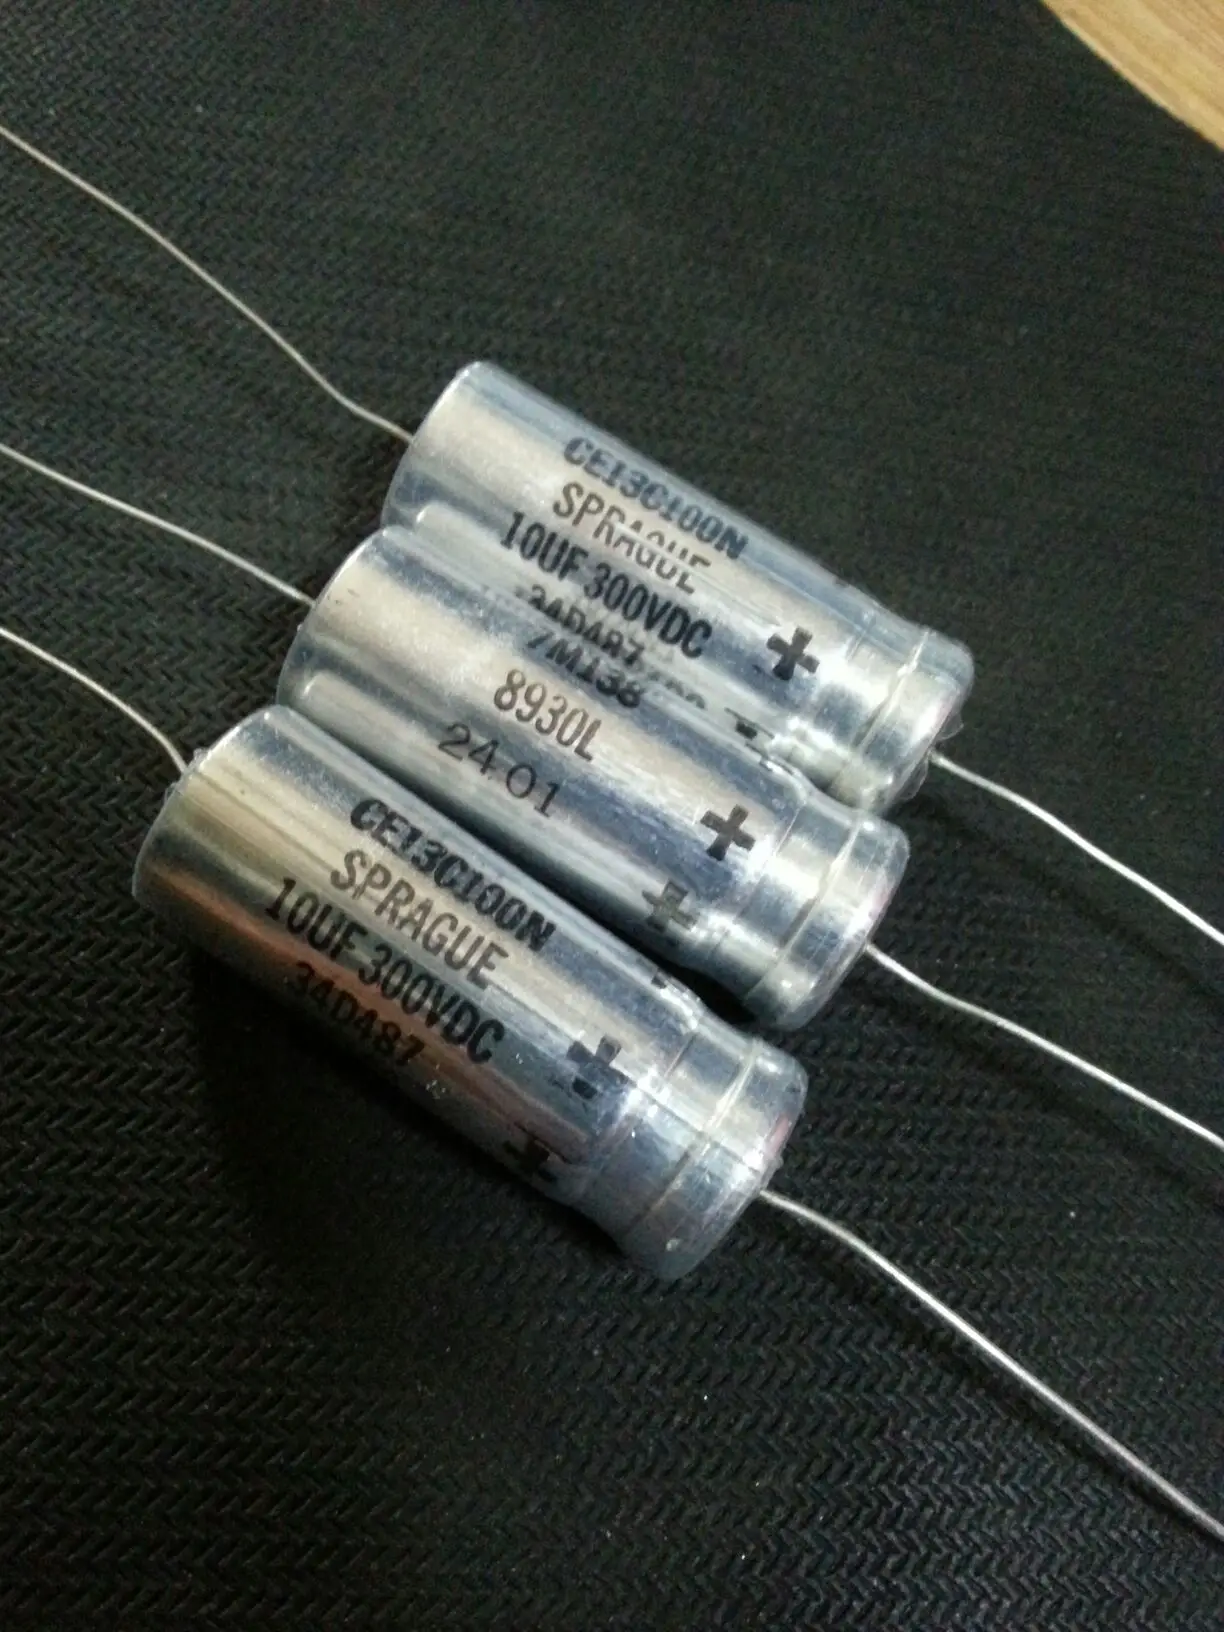 10pcs/30pcs American antique electrolytic capacitor SPRAGUE 10UF 300V 34D full copper foot free shipping